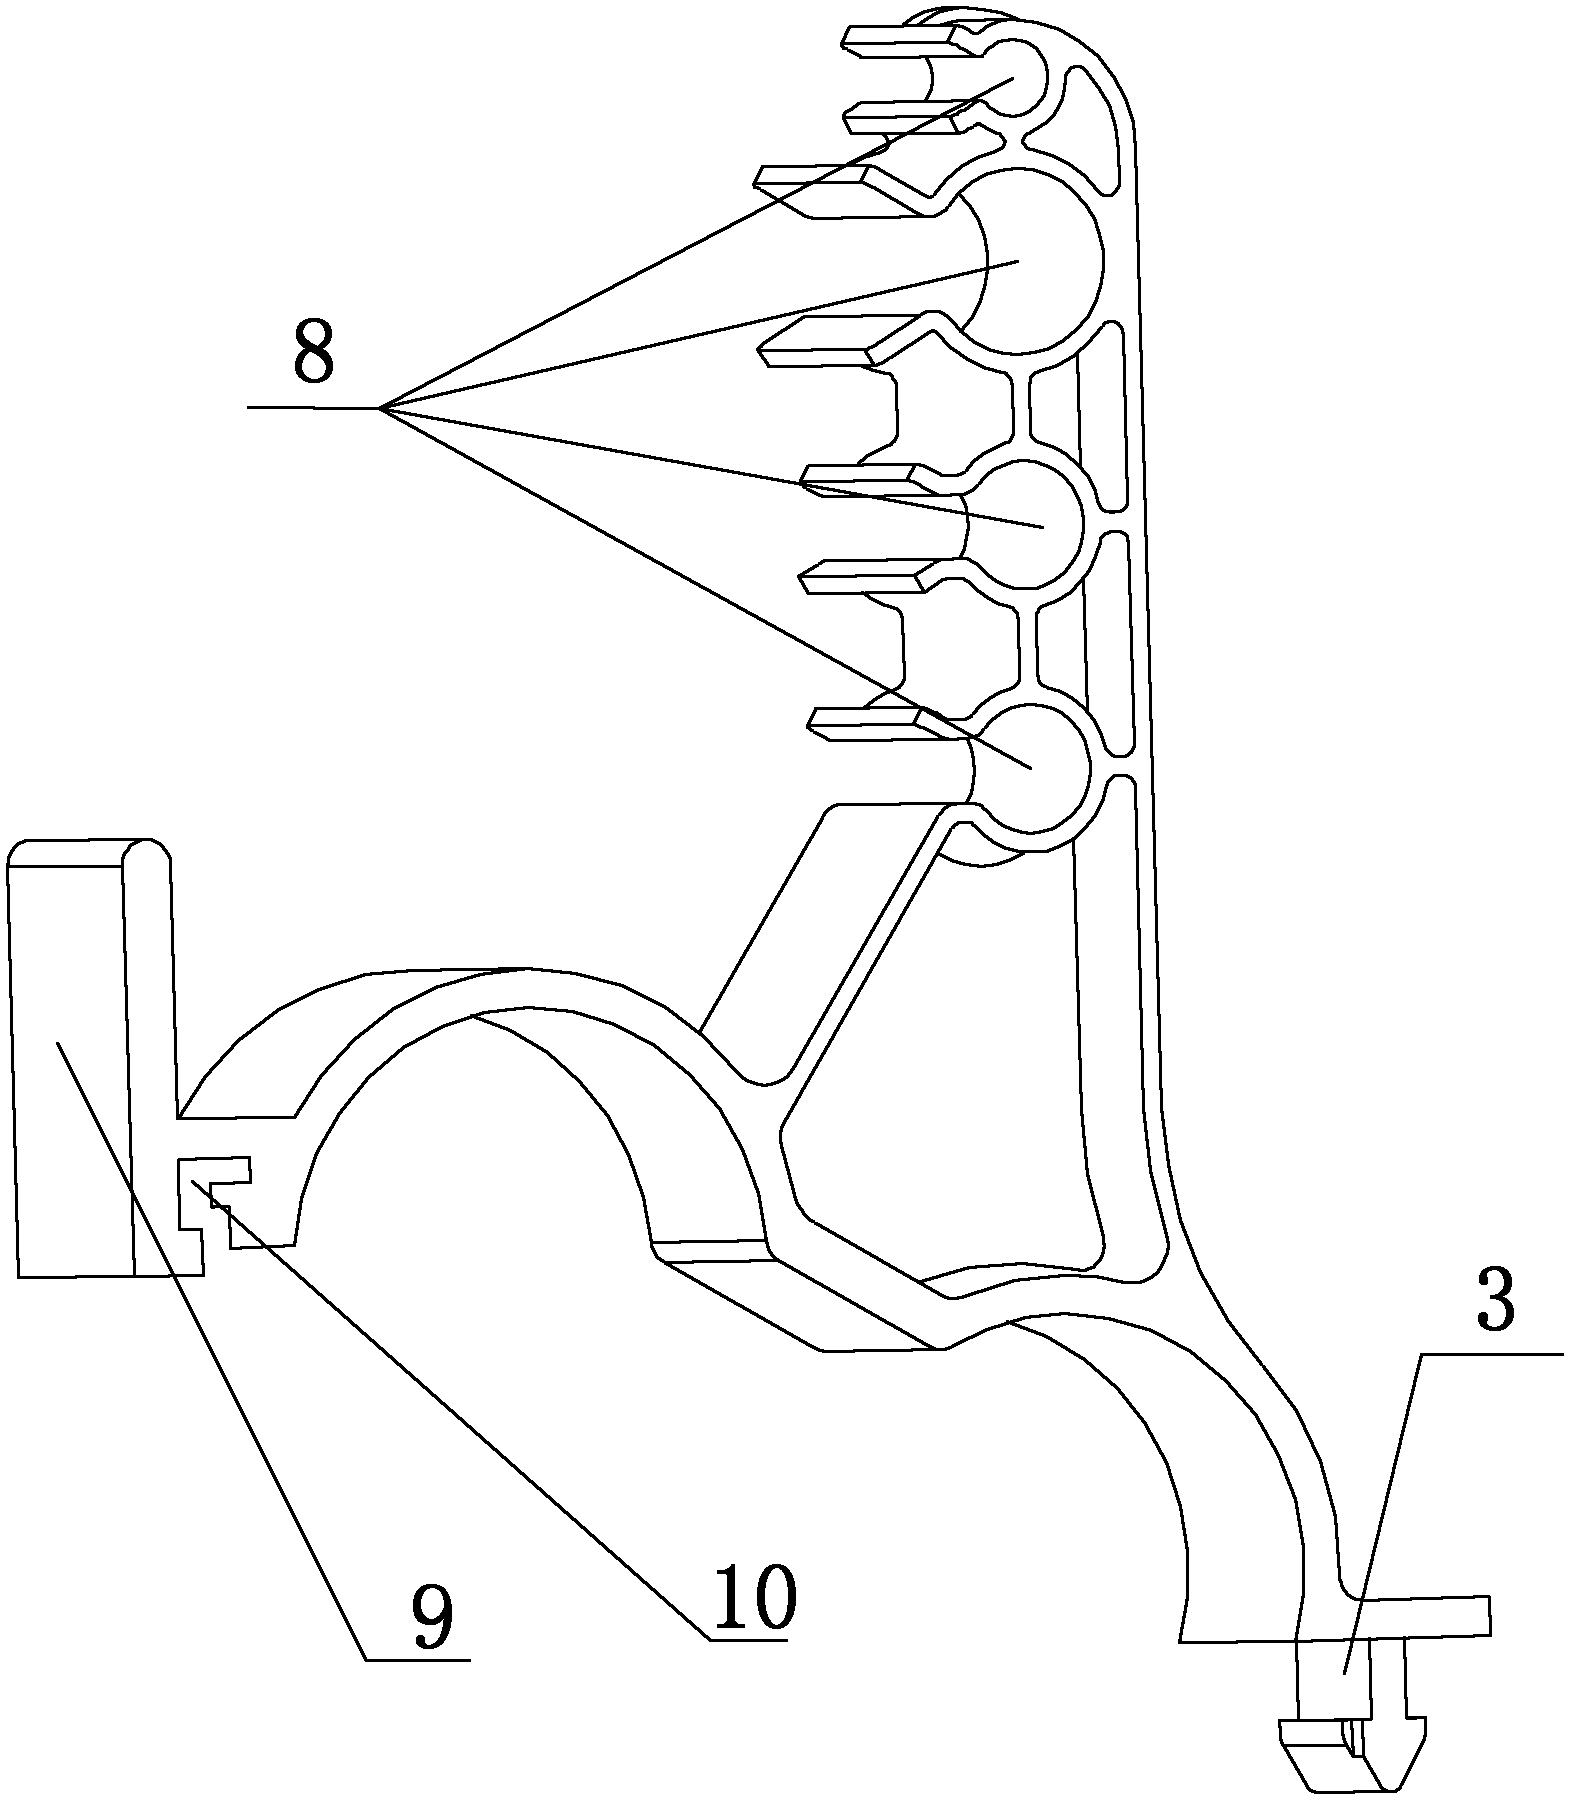 Pipe fixing device with multiple holes